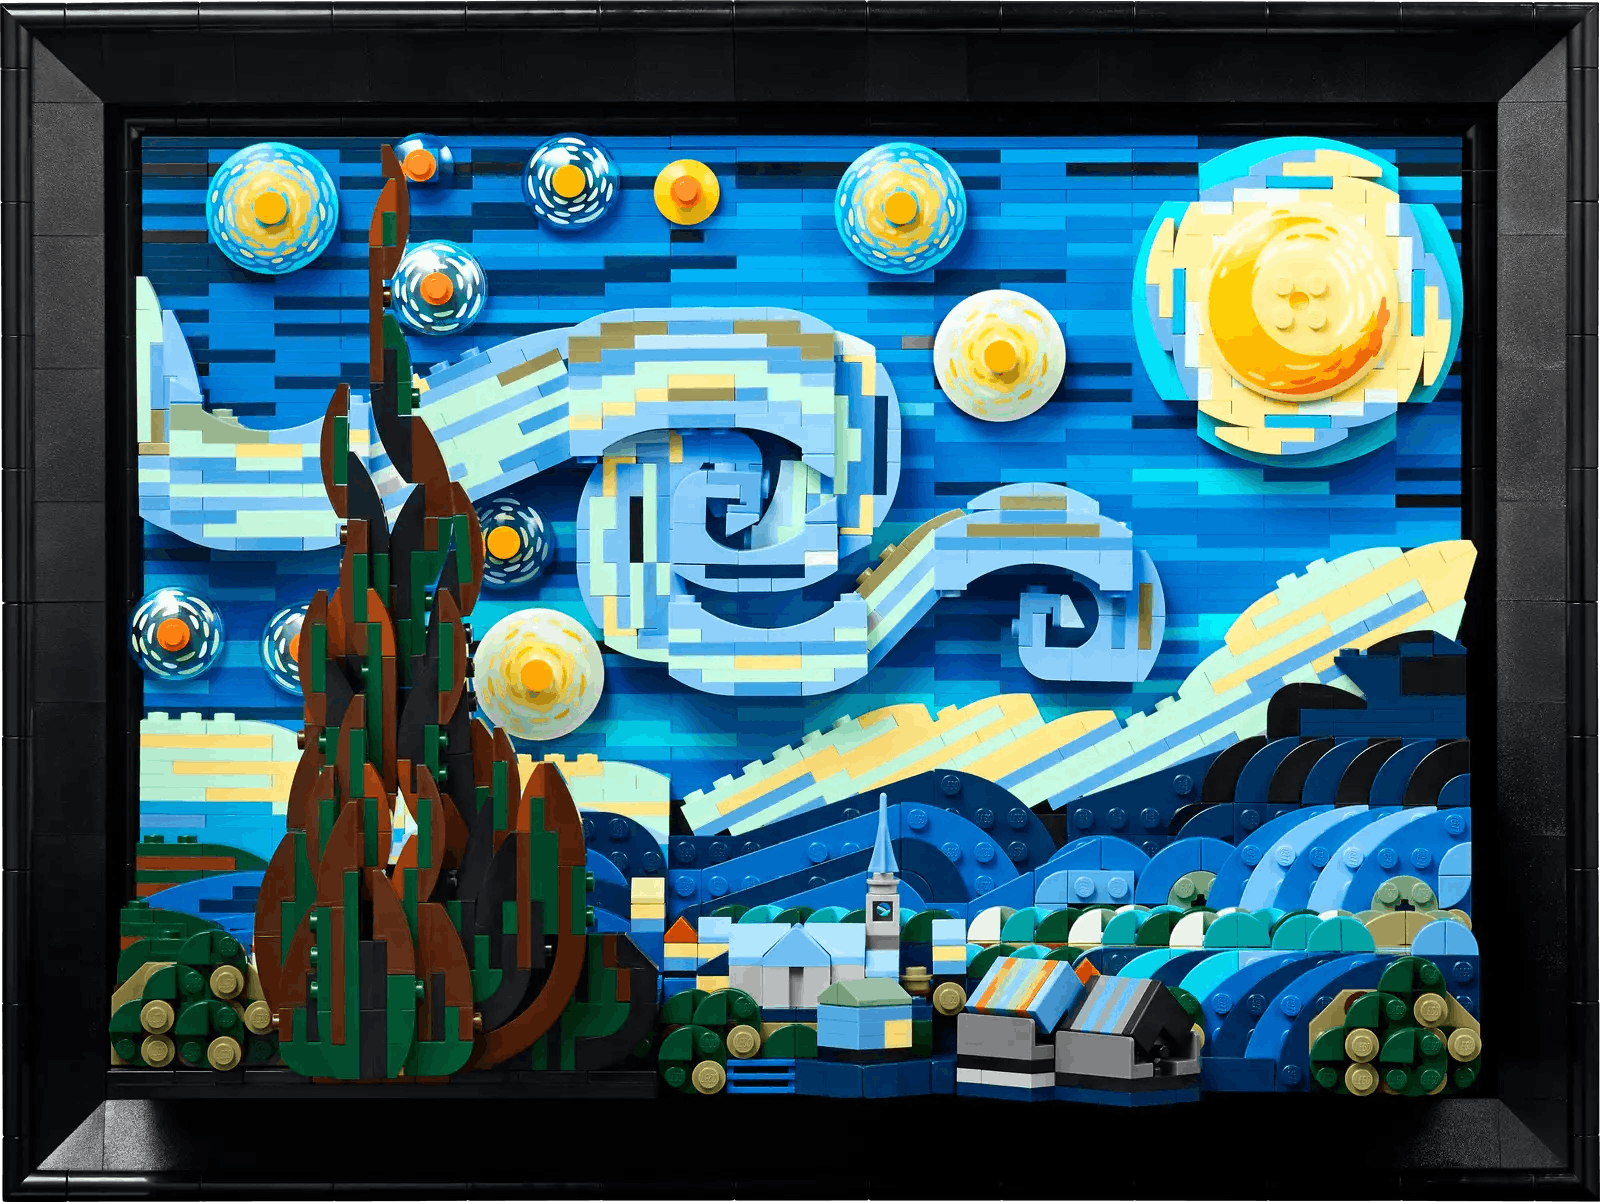 Vincent van Gogh - The Starry Night by LEGO